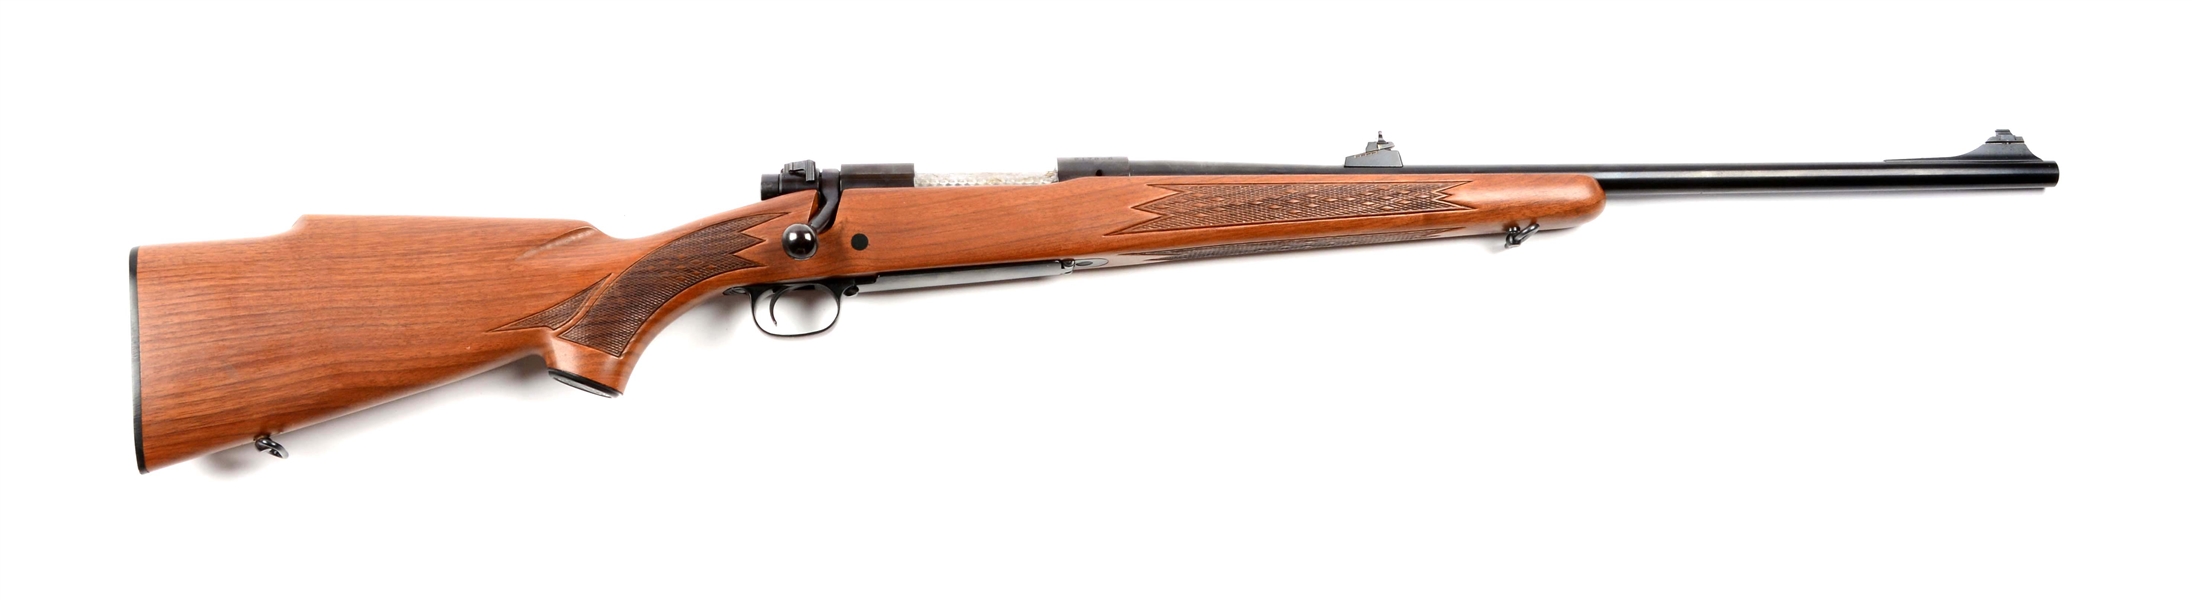 (M) WINCHESTER MODEL 70 BOLT ACTION SPORTING RIFLE.